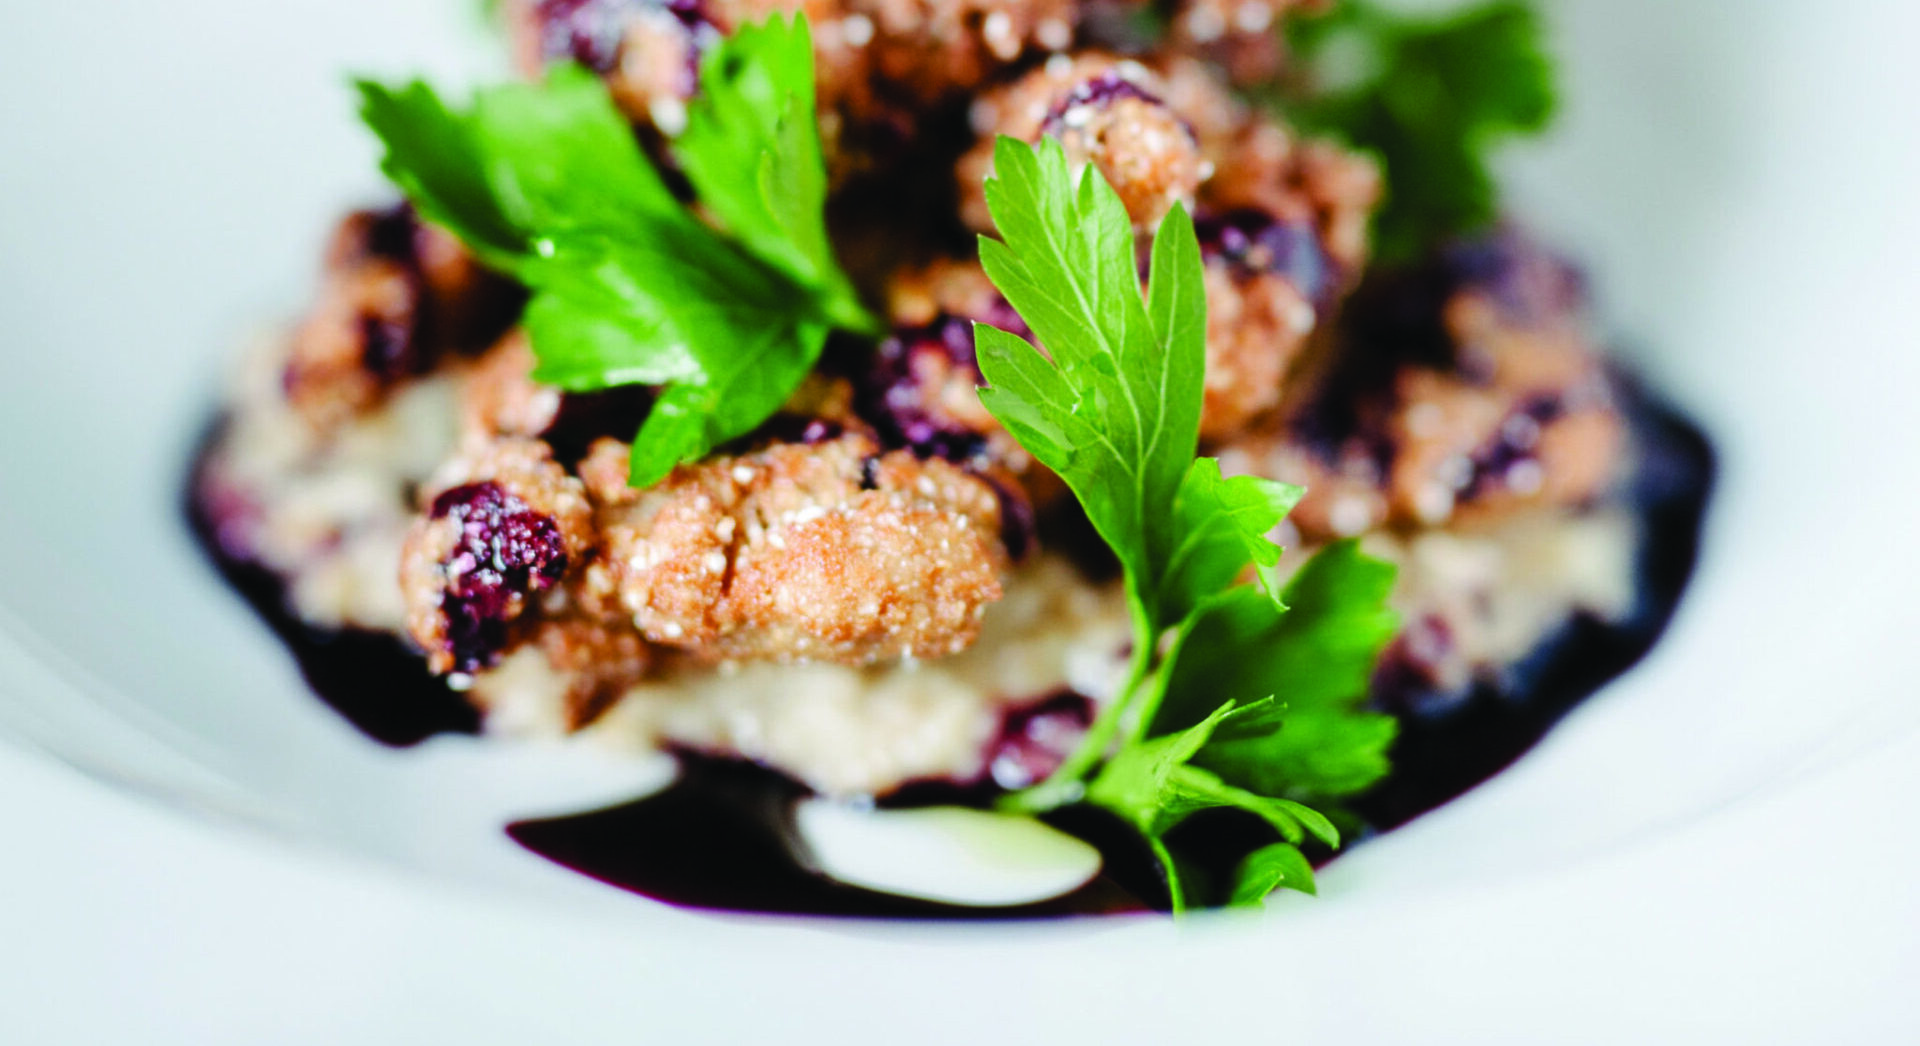 Miso Fried Quail with Concord Grape Hot Sauce and Dirty Oats